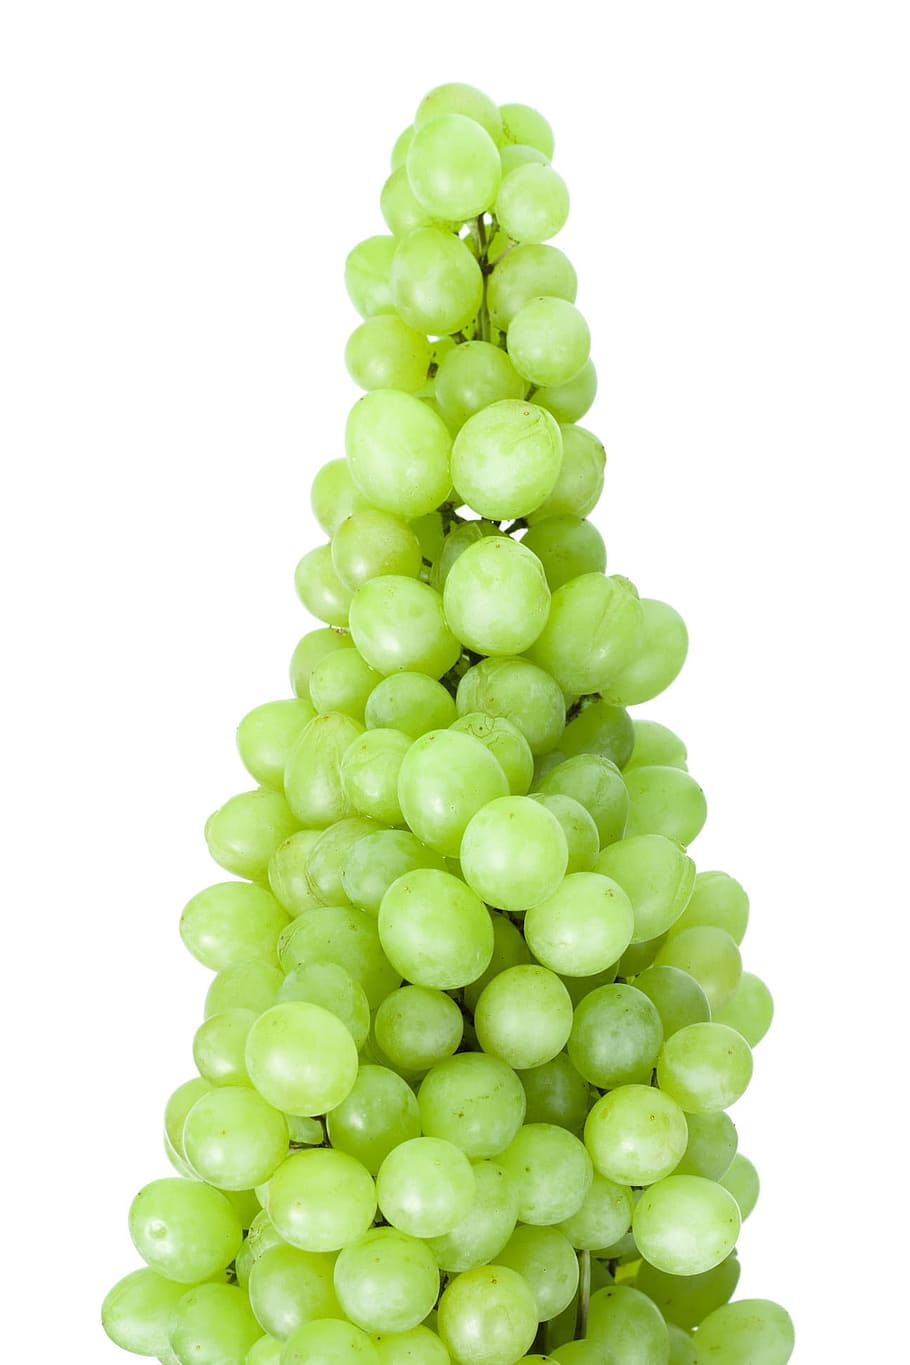 grapes, close-up, closeup, diet, dieting, eating, food, fresh, freshness, fruit